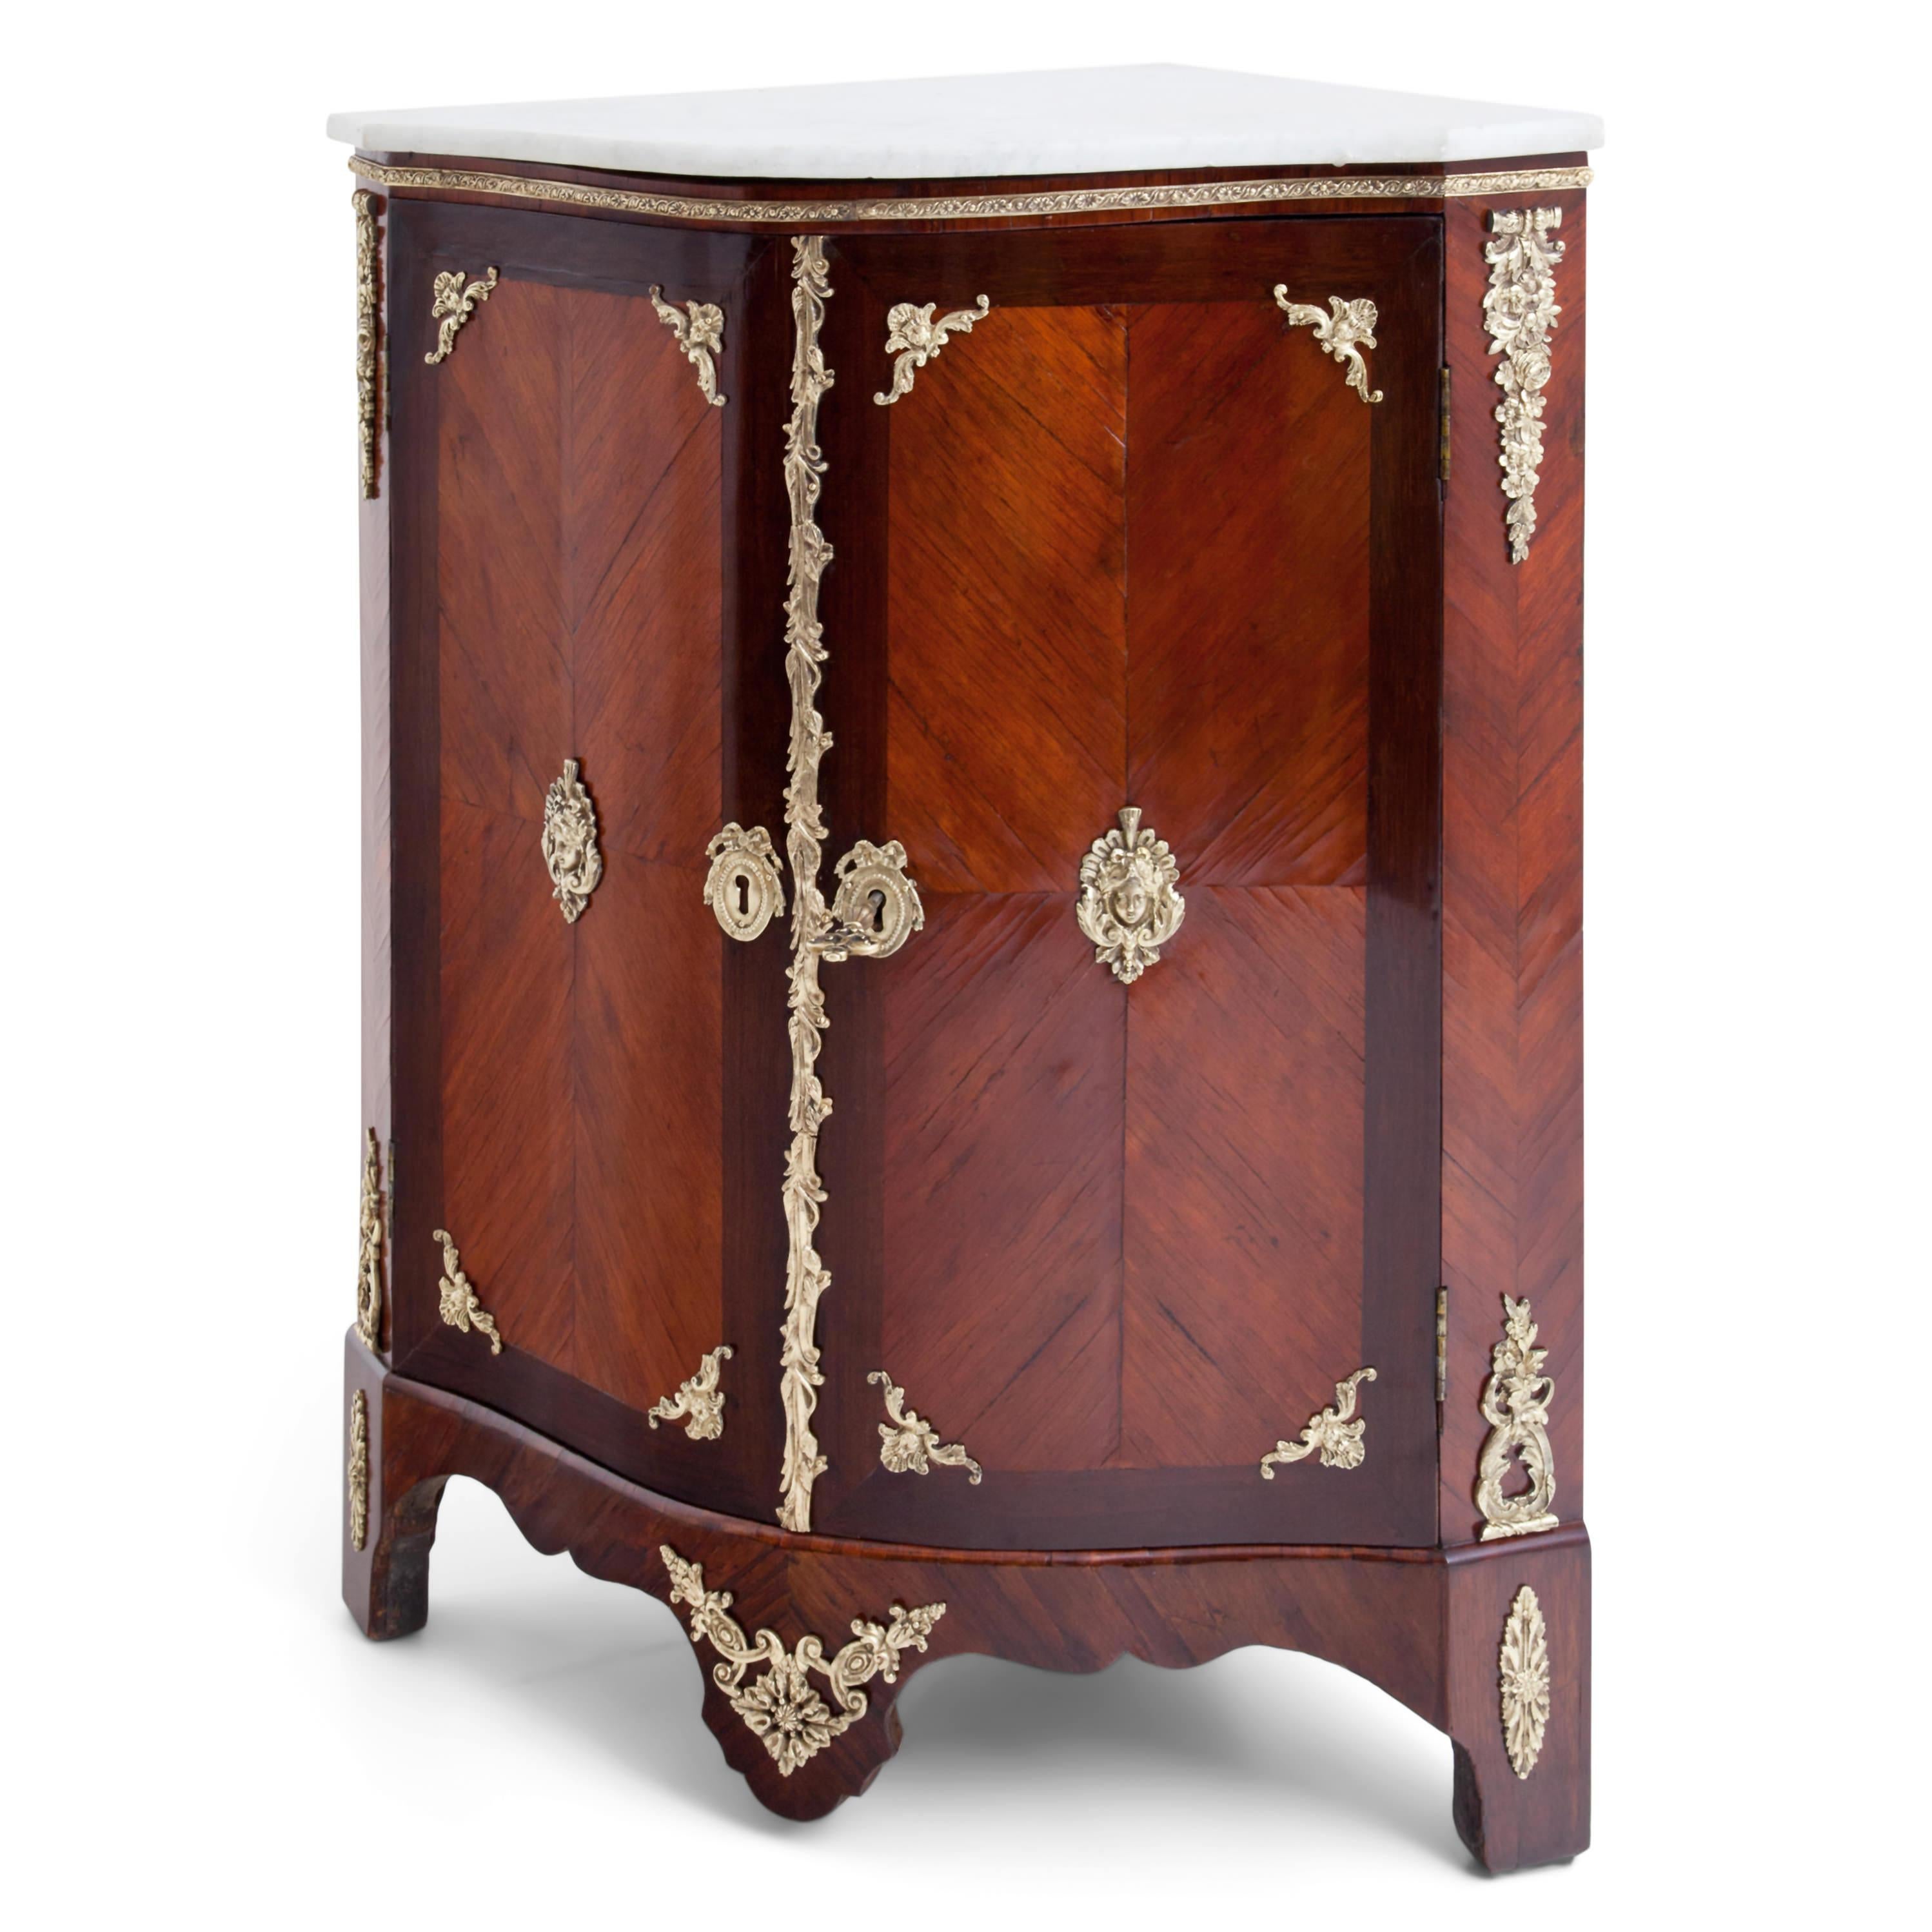 Two-door corner cupboard on wavy cut-out apron with marble-top and mahogany veneered, rounded body. Appliqués of fire-gilded bronze in the form of tendrils, rosettes and mascarons. The marble top is recent of the 19th century. Under the plate